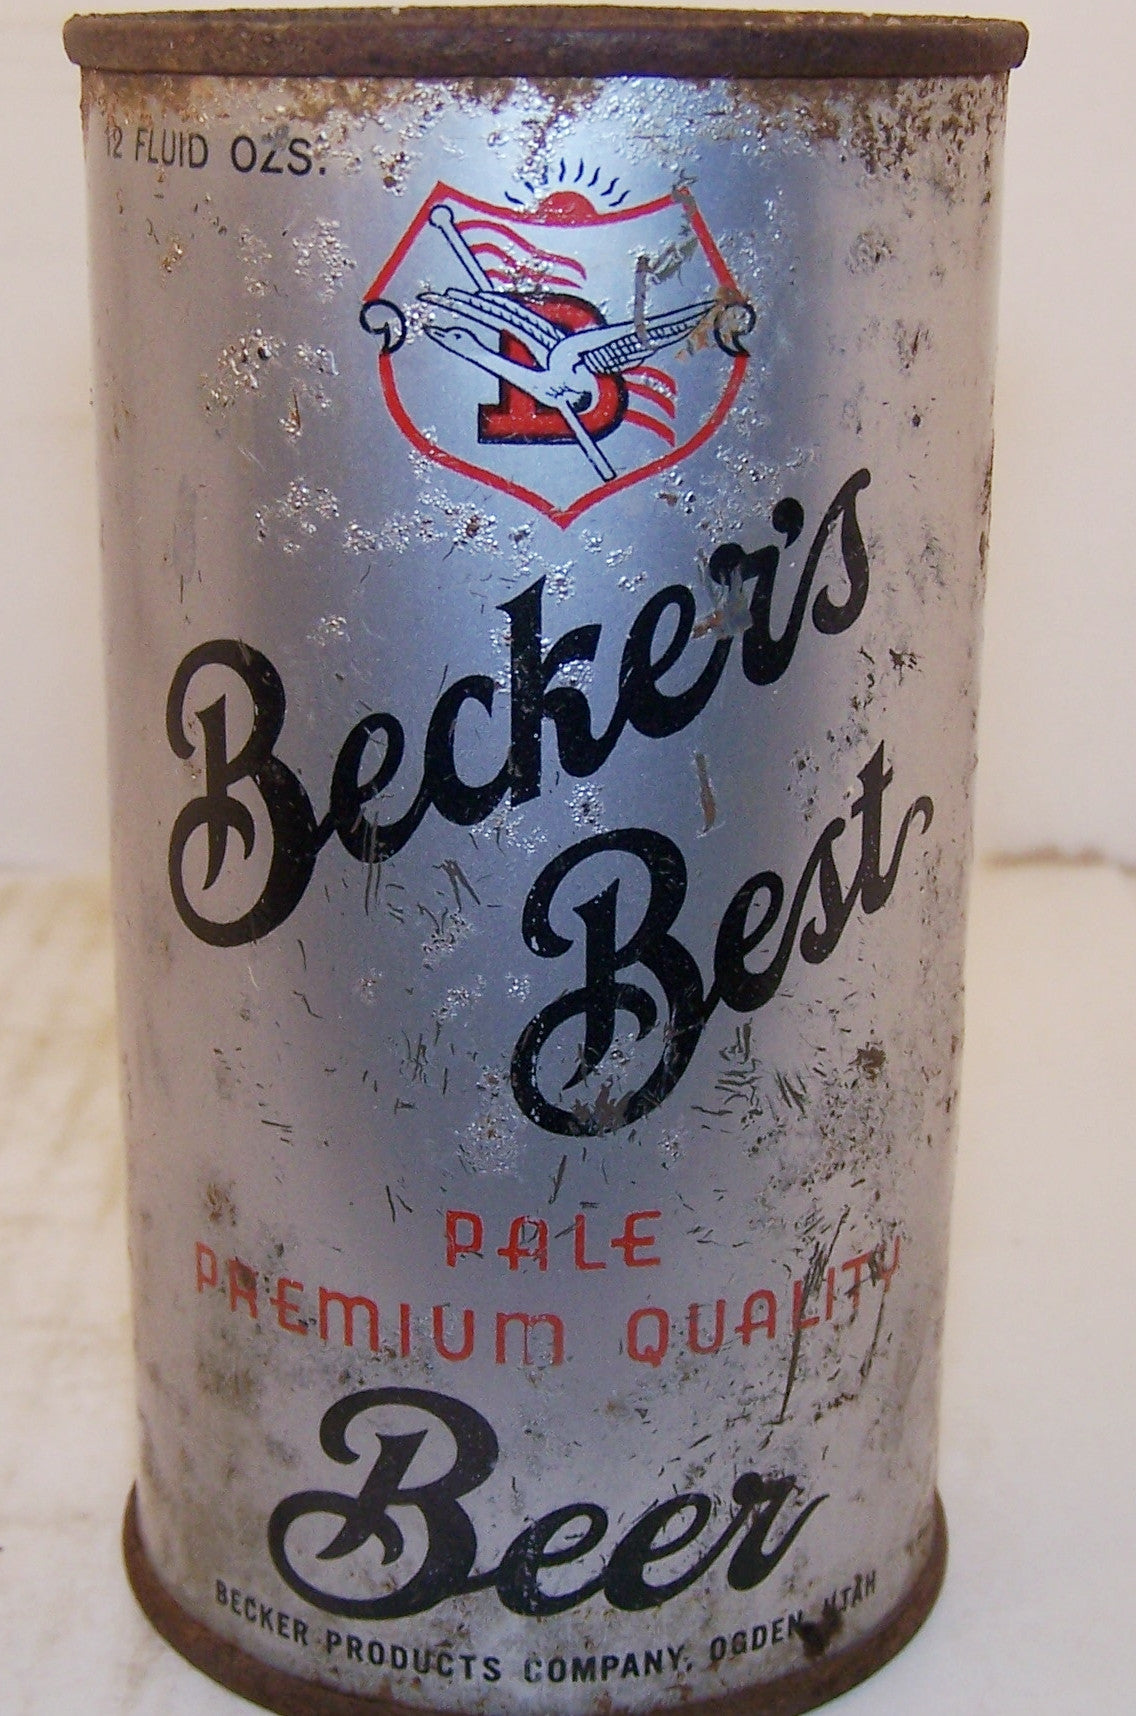 Becker's Best Beer USBC 35-25 and Lilek # 98, Grade 2 Sold on 4/15/15